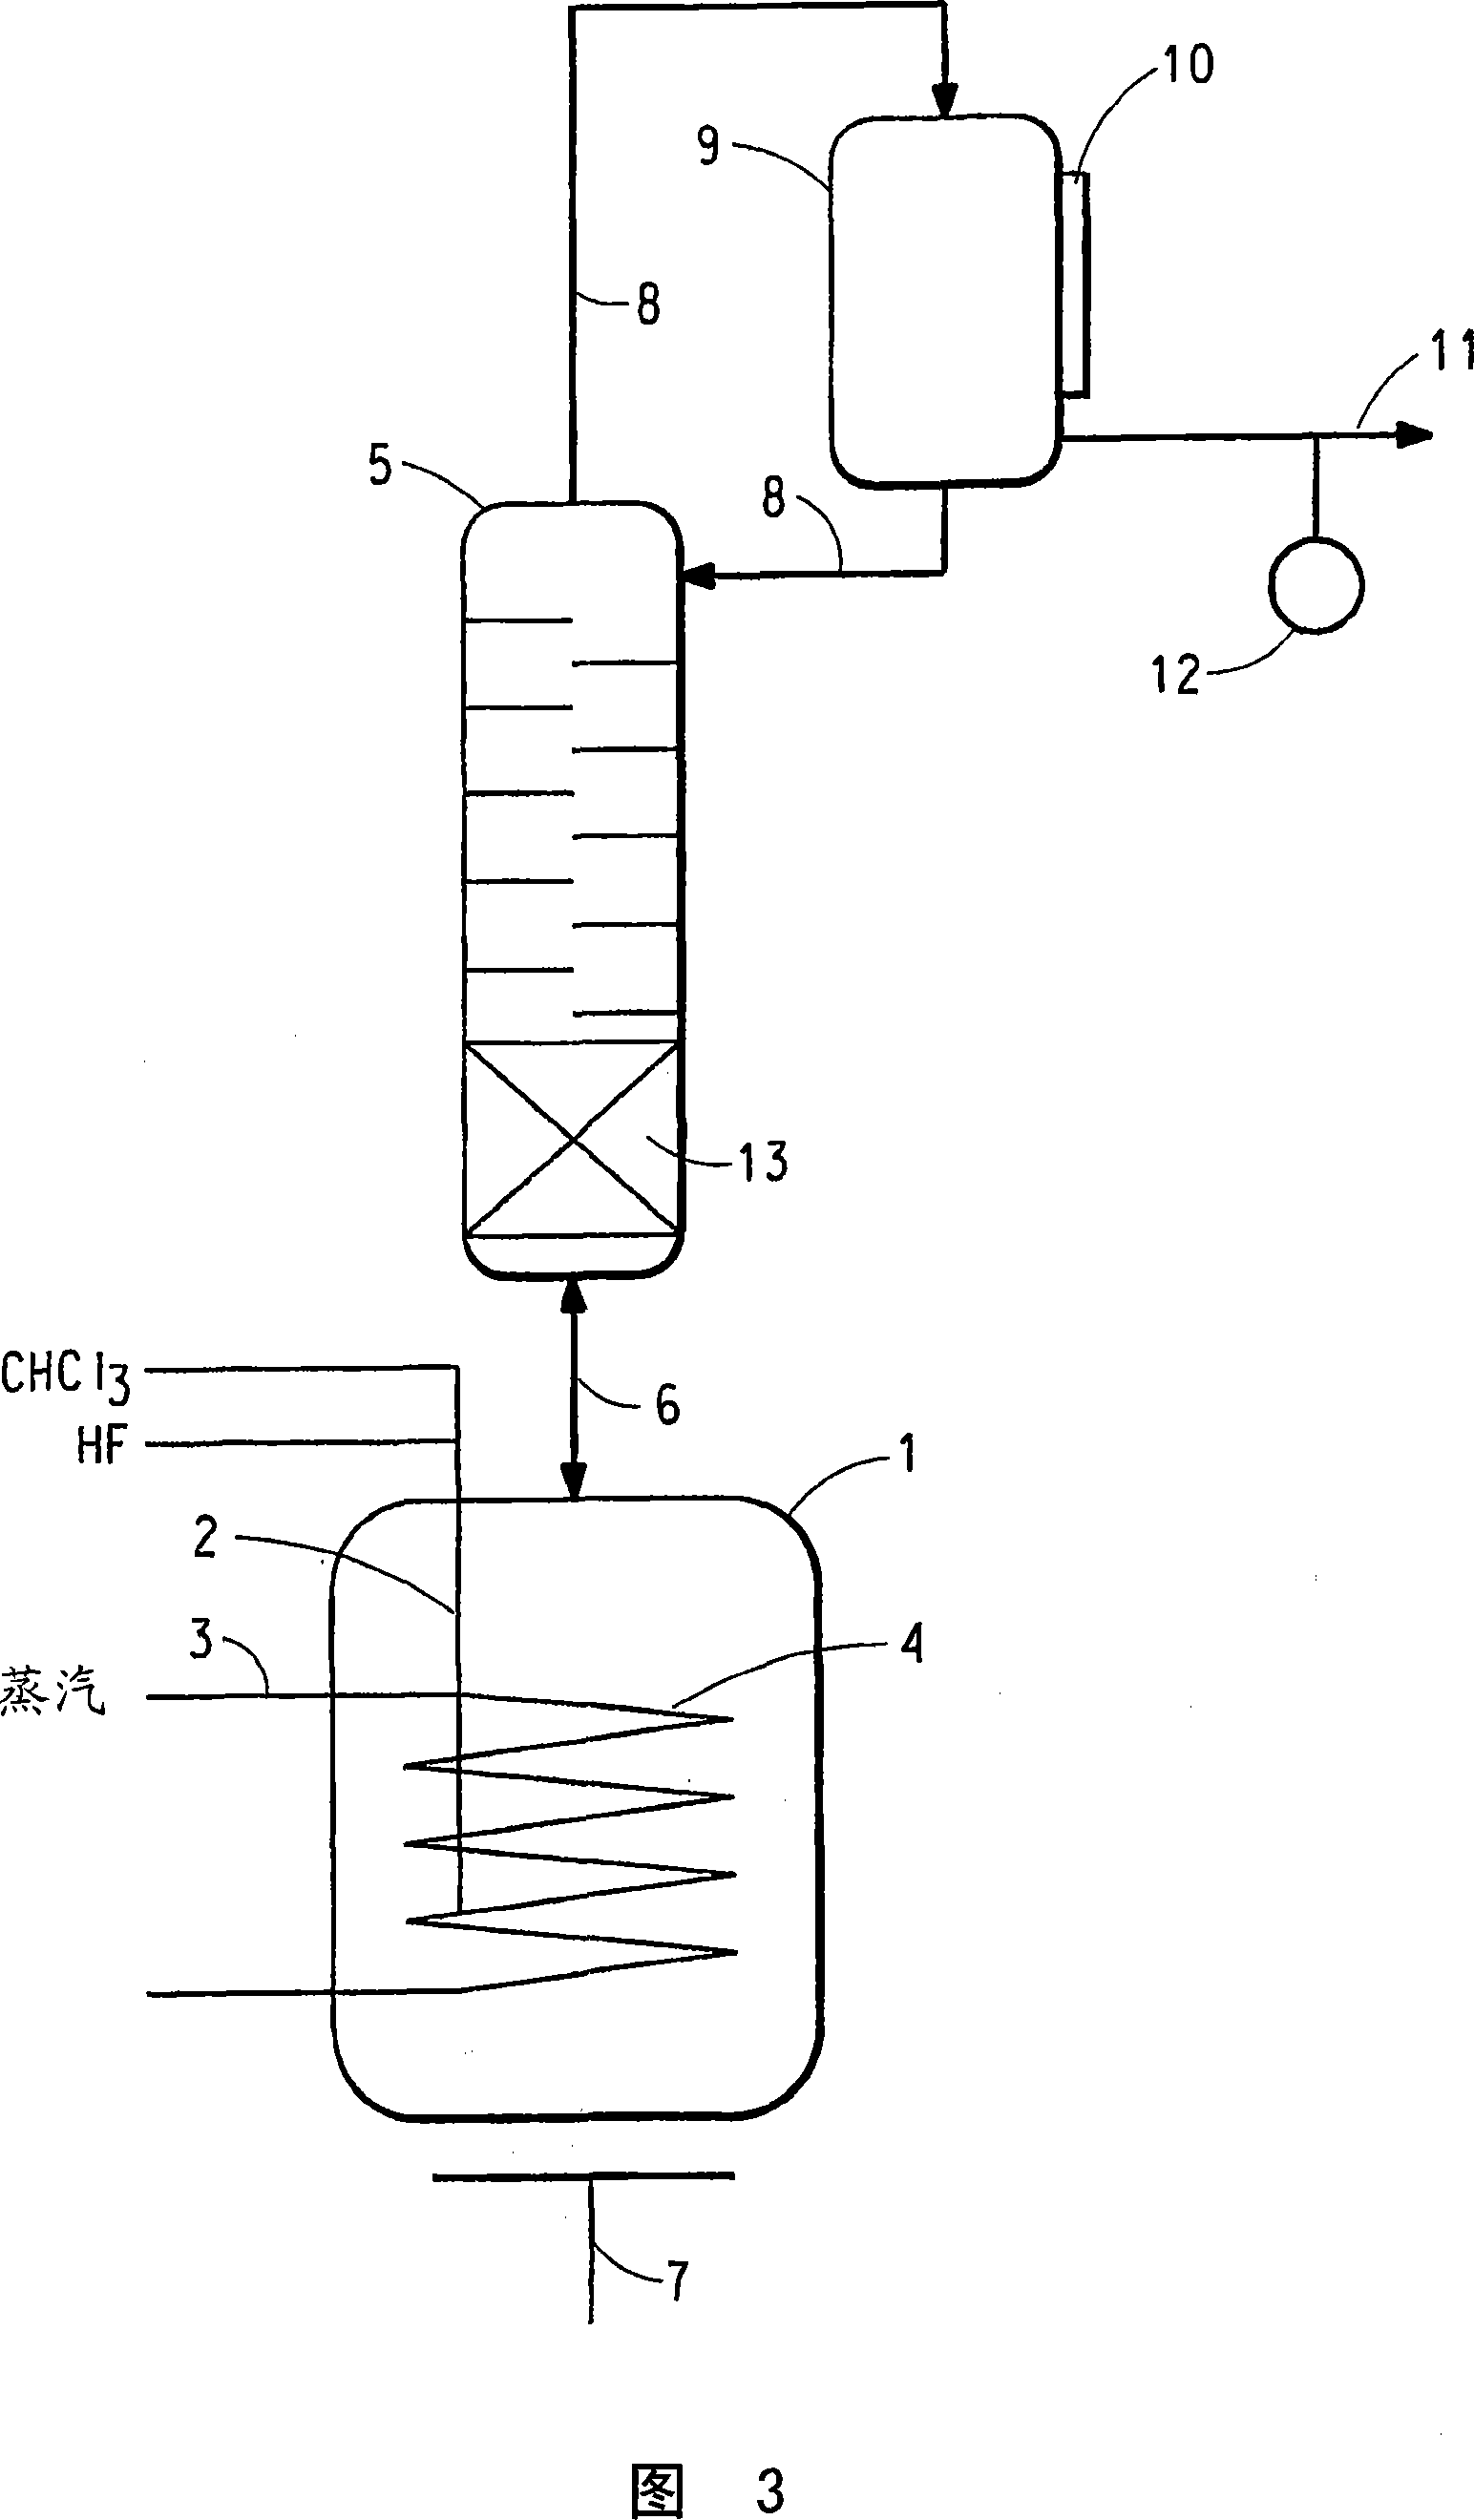 Process for the manufacture of chlorodifluoromethane